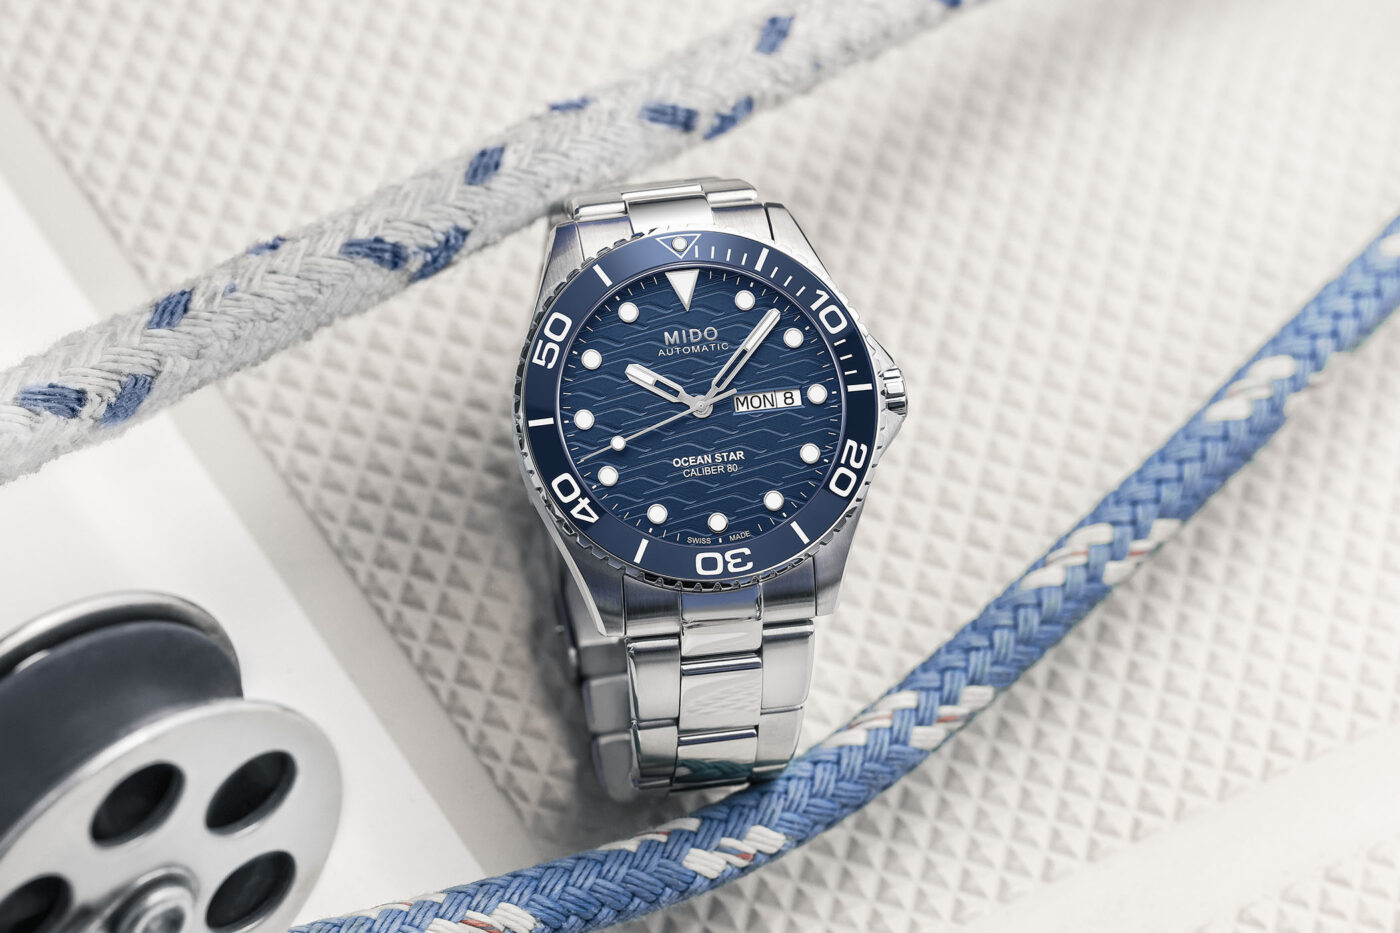 Introducing The Mido Ocean Star 200C Trilogy Watches